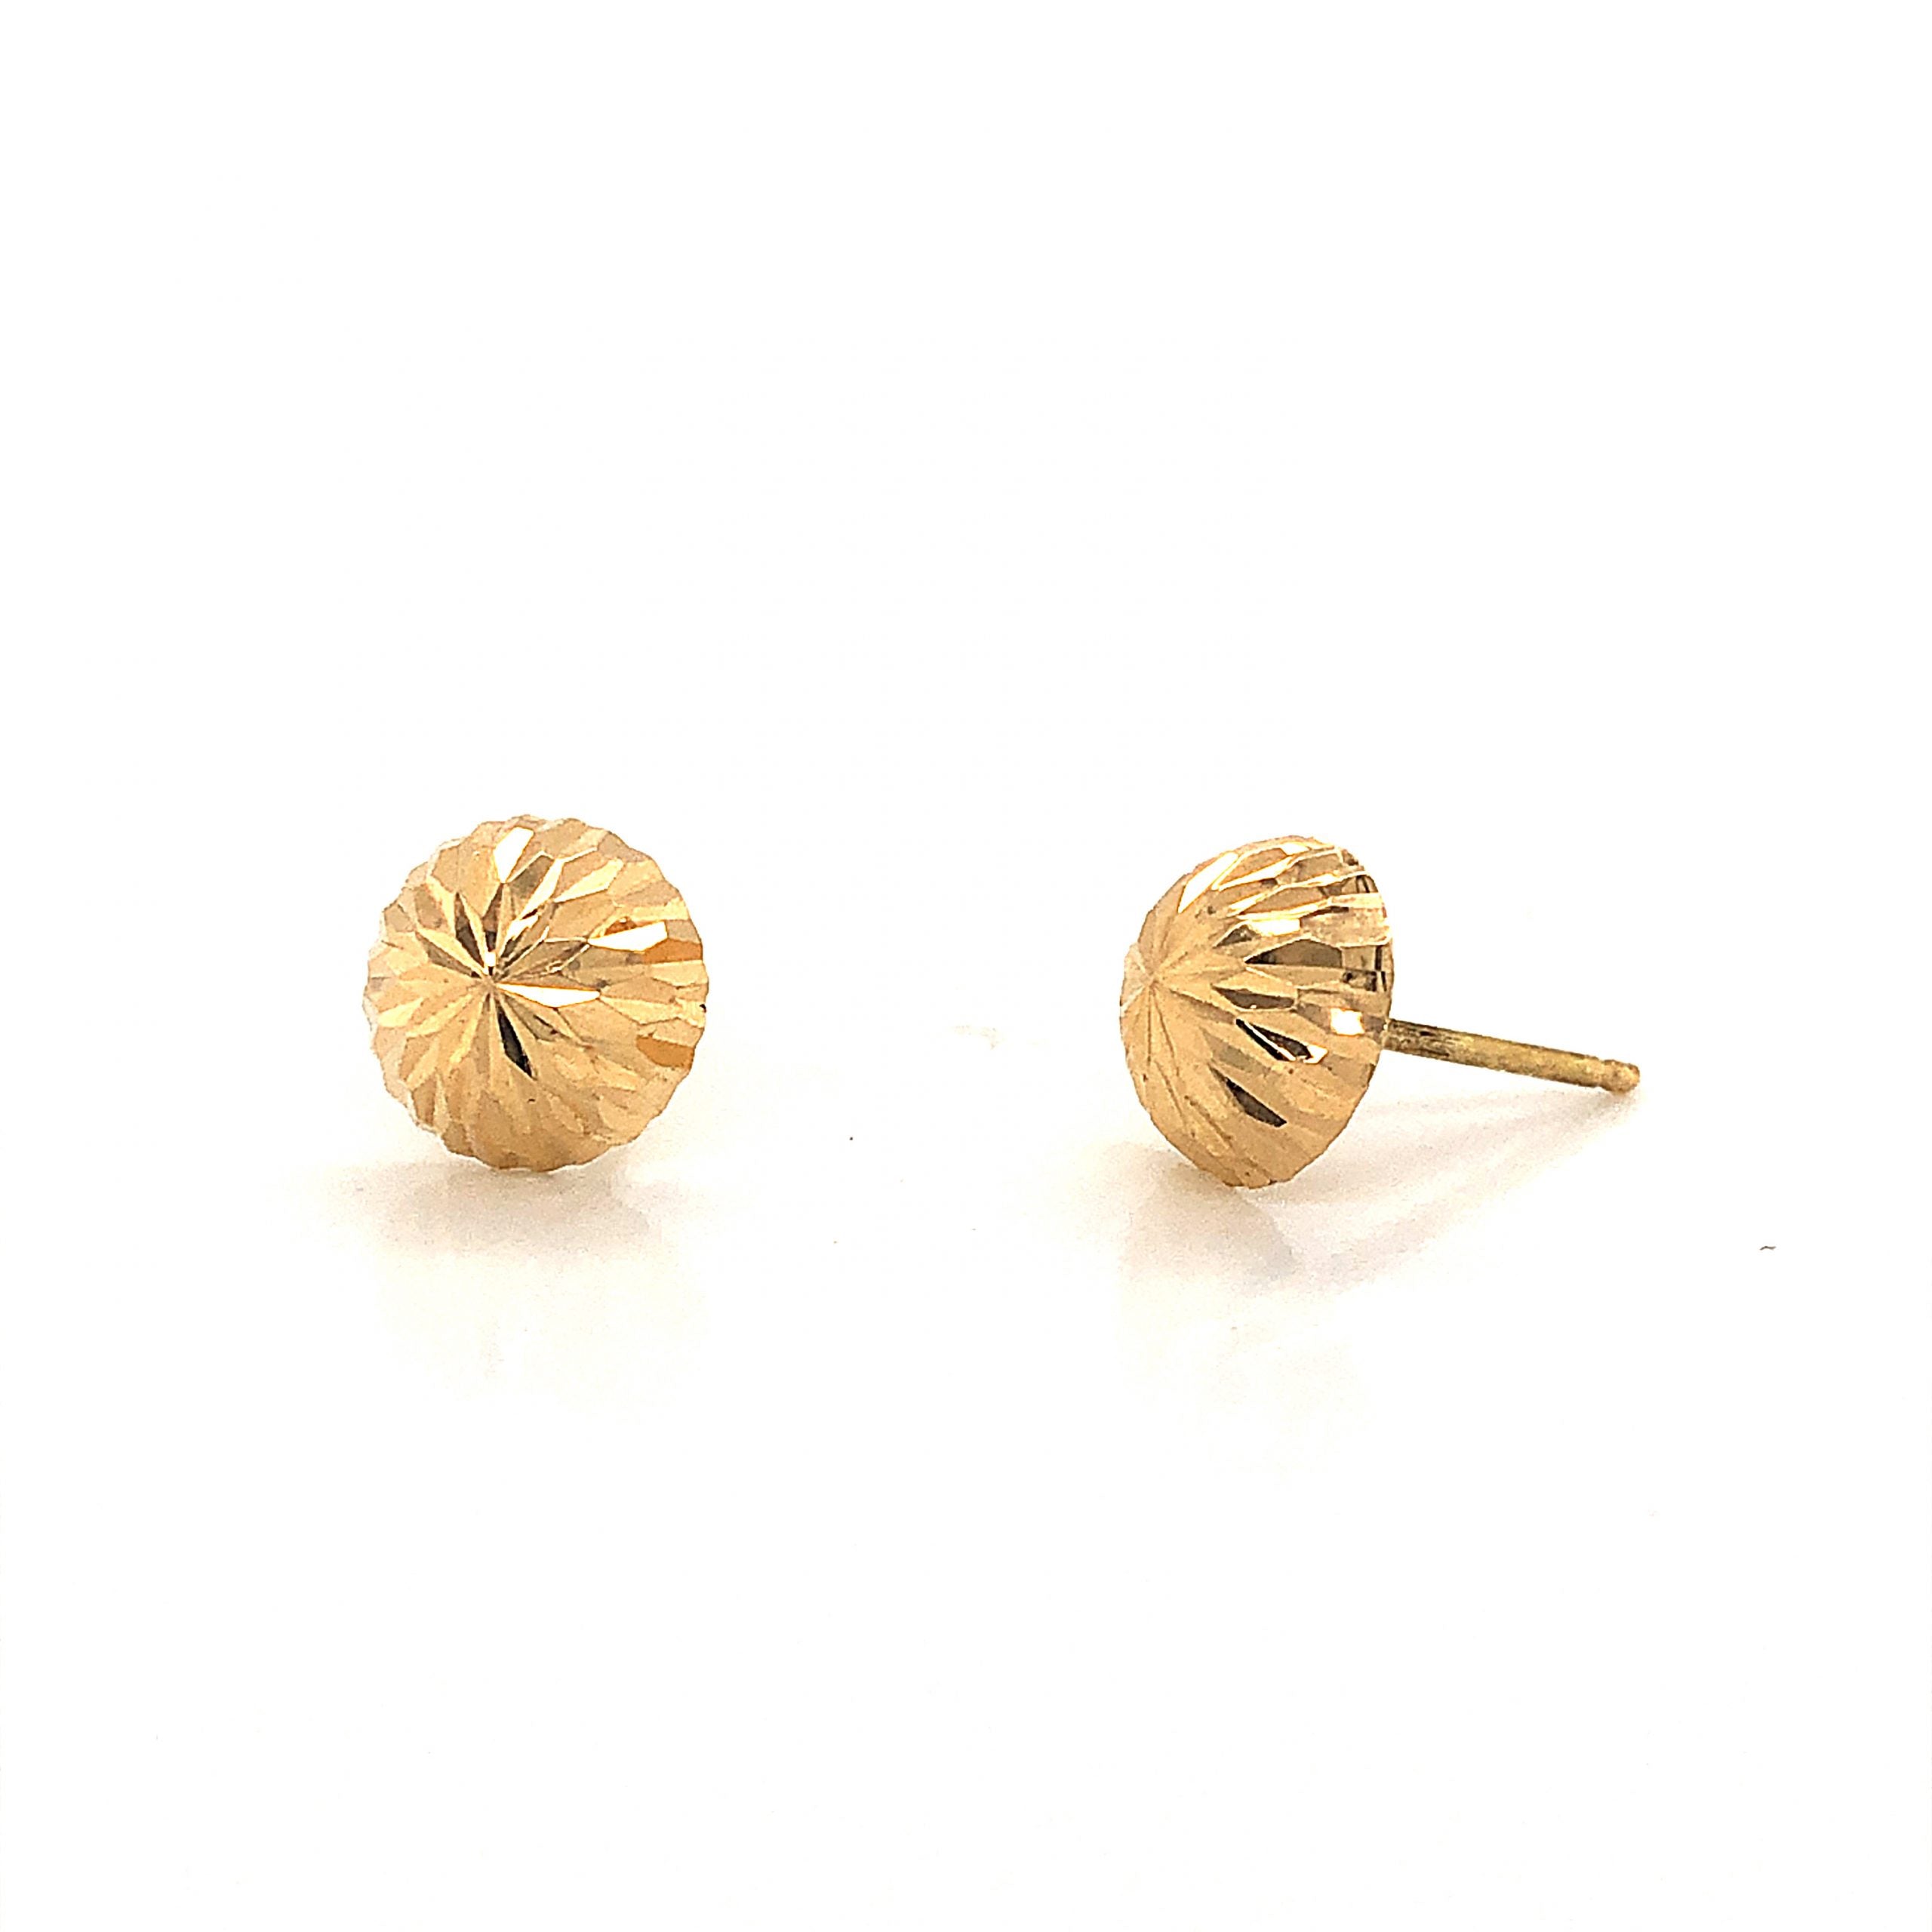 Golden Round 925 Sterling Silver Earring Studs at Rs 1200/pair in Jaipur |  ID: 27405329473